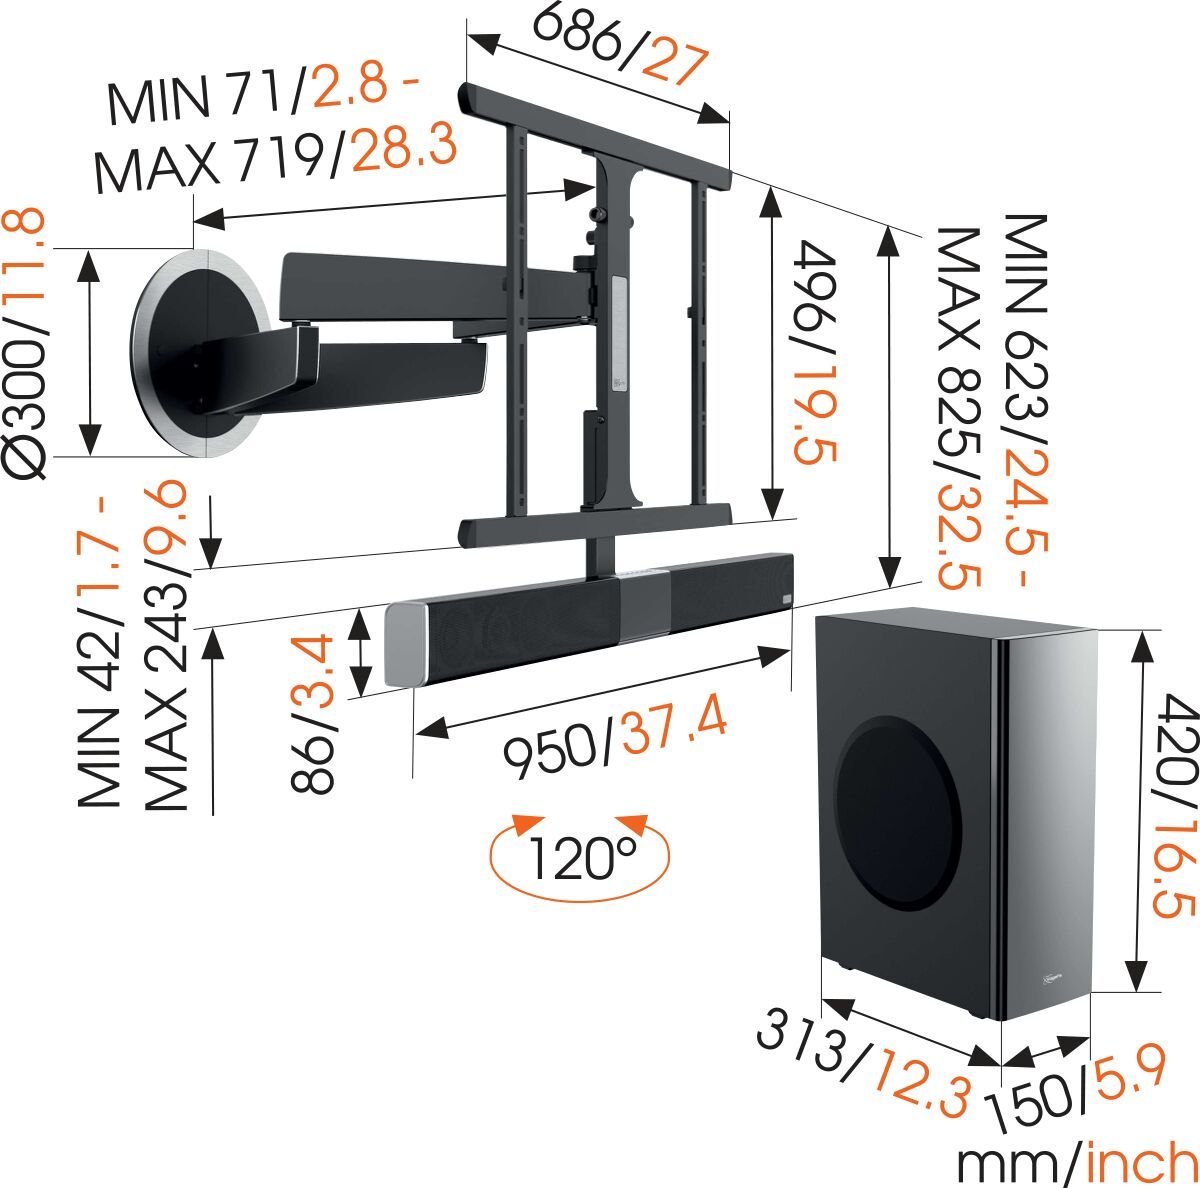 Vogel's SoundMount (NEXT 8365 AU) Full-Motion TV Wall Mount with Integrated Sound 40 65 Motion (up to 120°) Dimensions